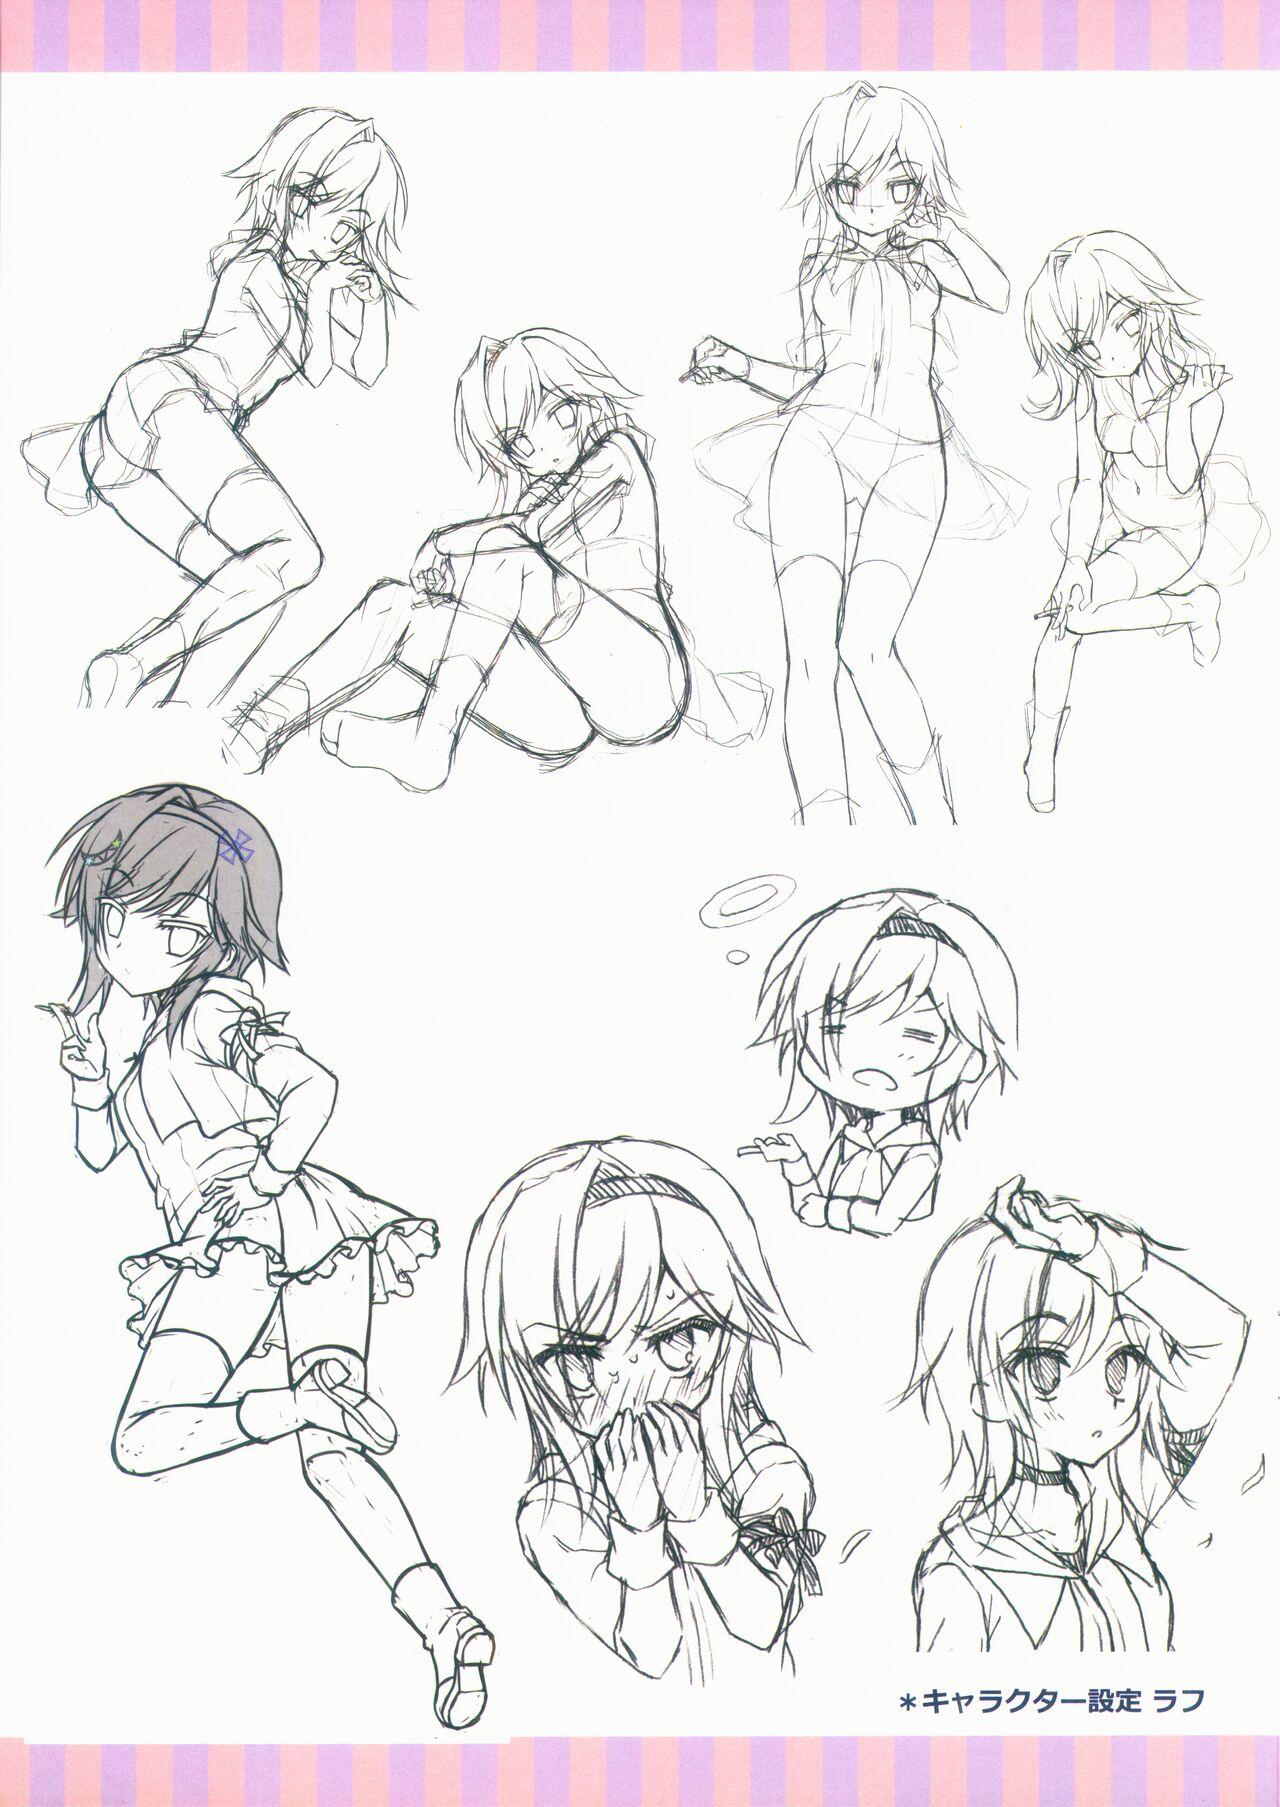 Dick Sucking [SAGA PLANETS] Kin-iro Loveriche&Kin-iro Loveriche -Golden Time- Visual Fan Book MELONBOOKS Only Bought Special Unreleased Roughs Book - Kin iro loveriche Cameltoe - Page 8